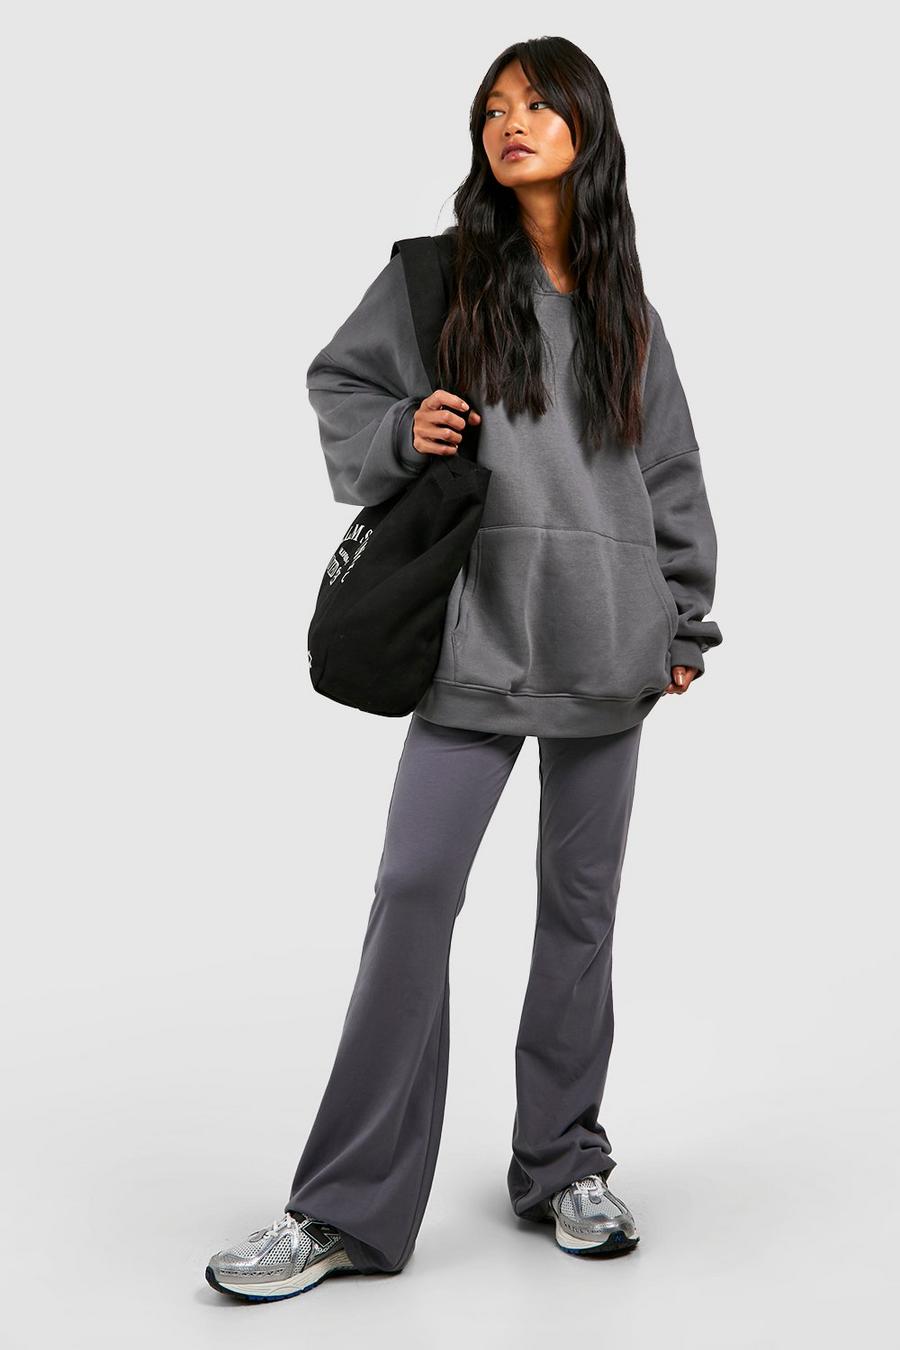 Charcoal grey Cotton Jersey Knit High Waisted Puddle Hem Flares